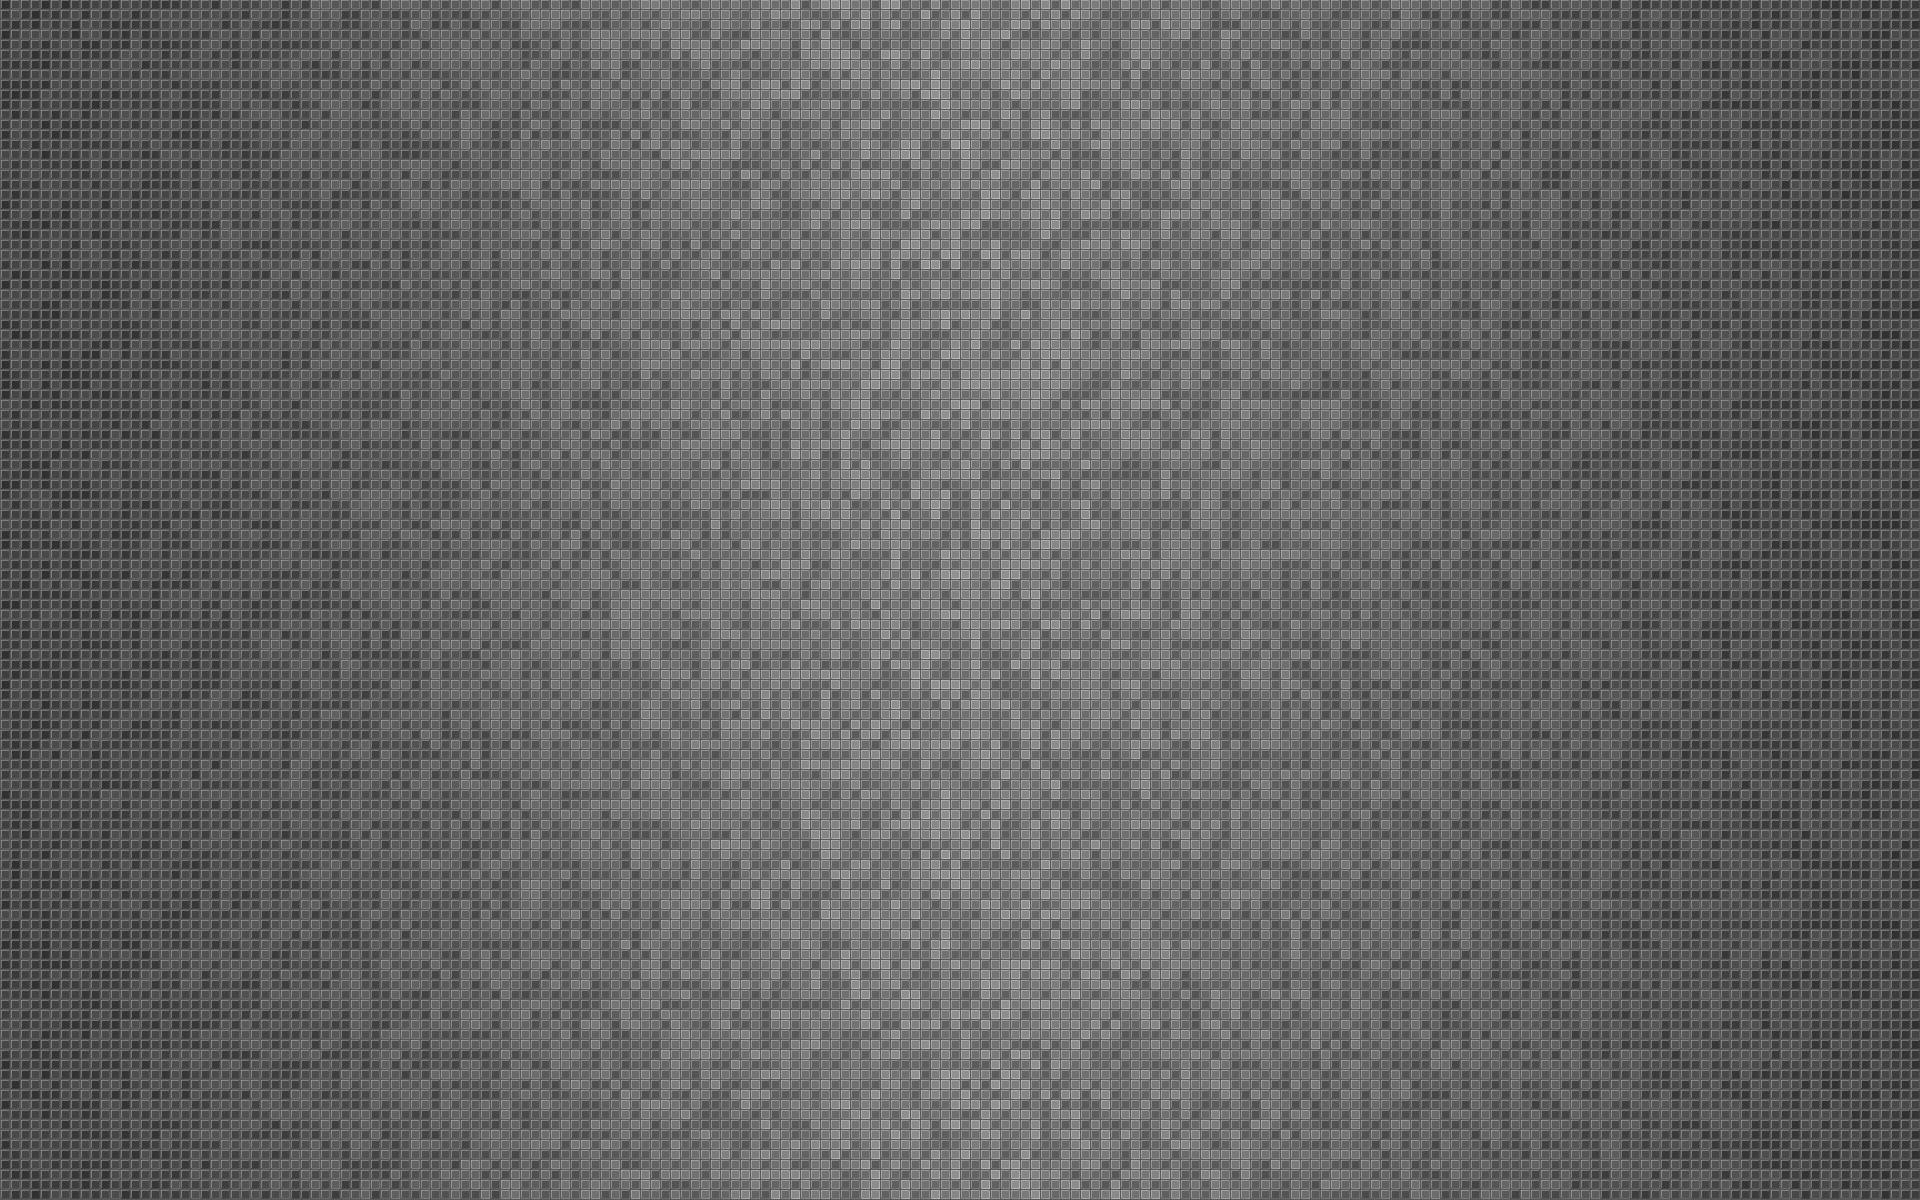 Finely Pixelated Grey Cover Background